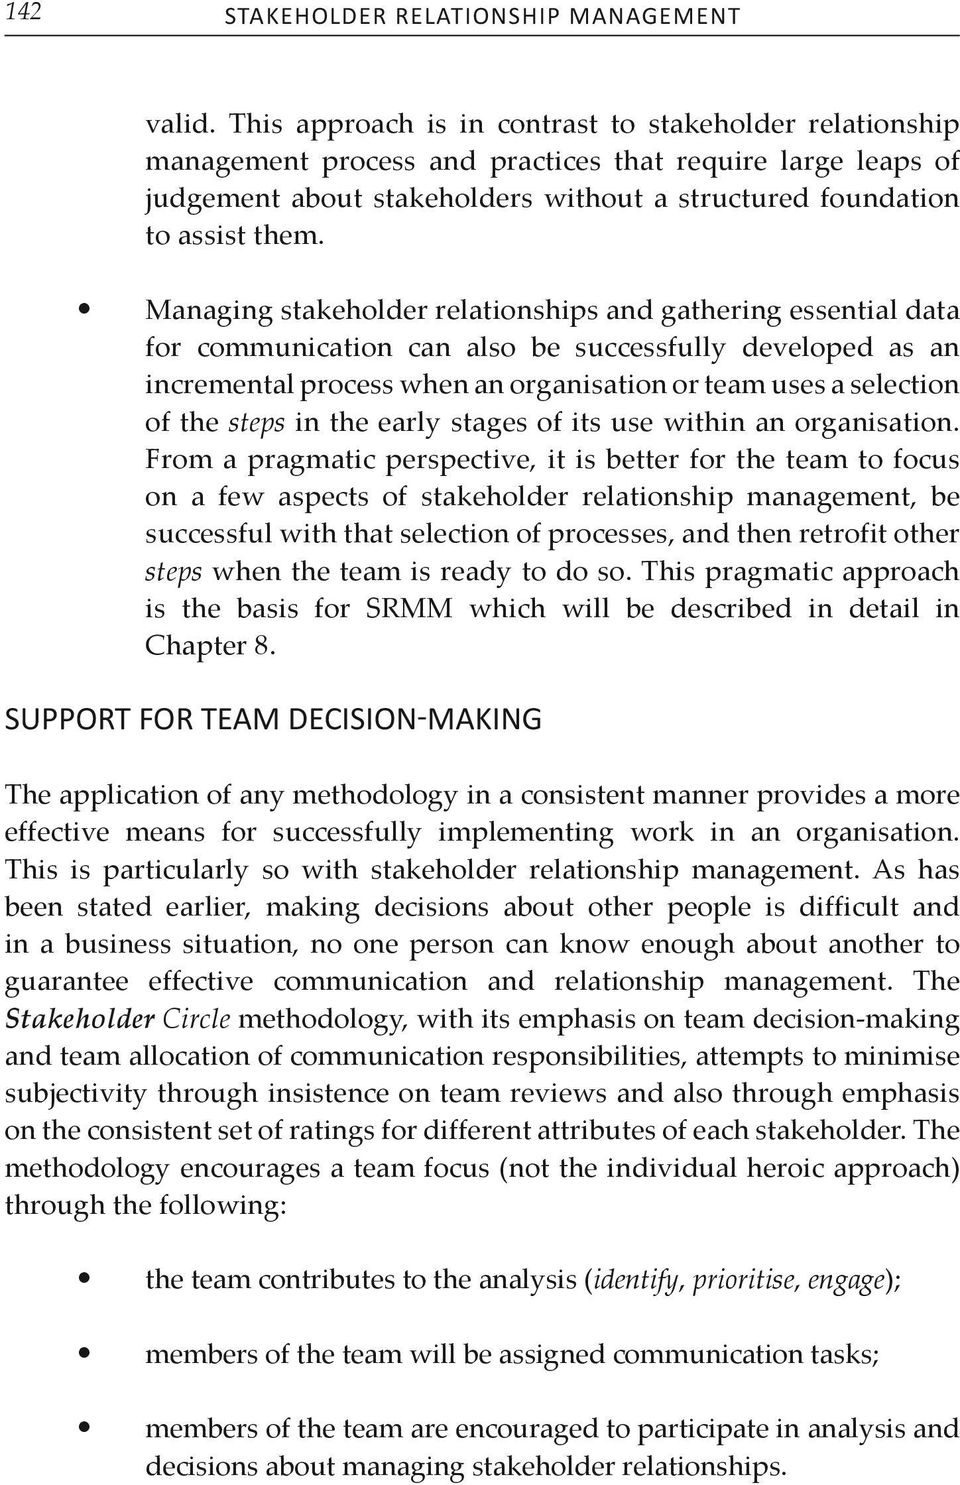 Managing stakeholder relationships and gathering essential data for communication can also be successfully developed as an incremental process when an organisation or team uses a selection of the